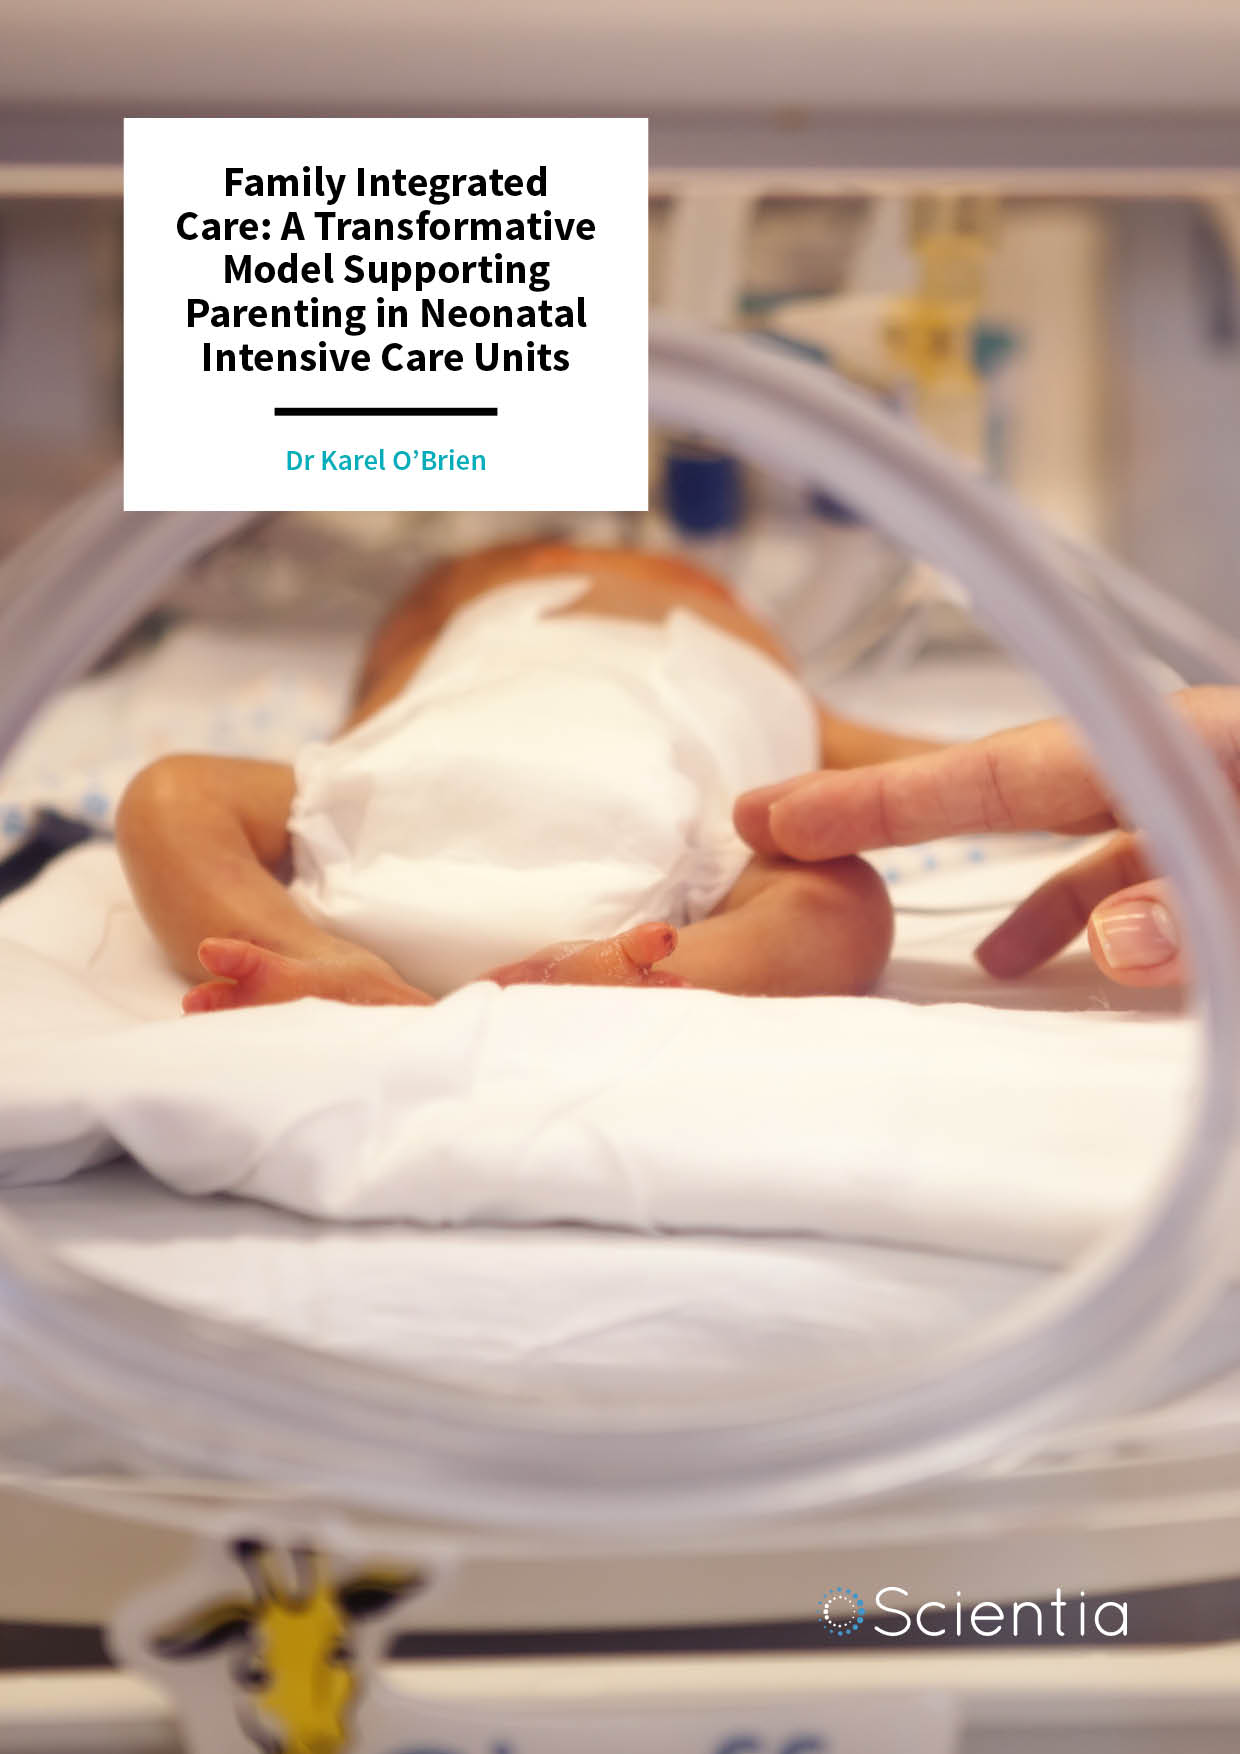 Dr Karel O’Brien | Family Integrated Care: A Transformative Model Supporting Parenting in Neonatal Intensive Care Units